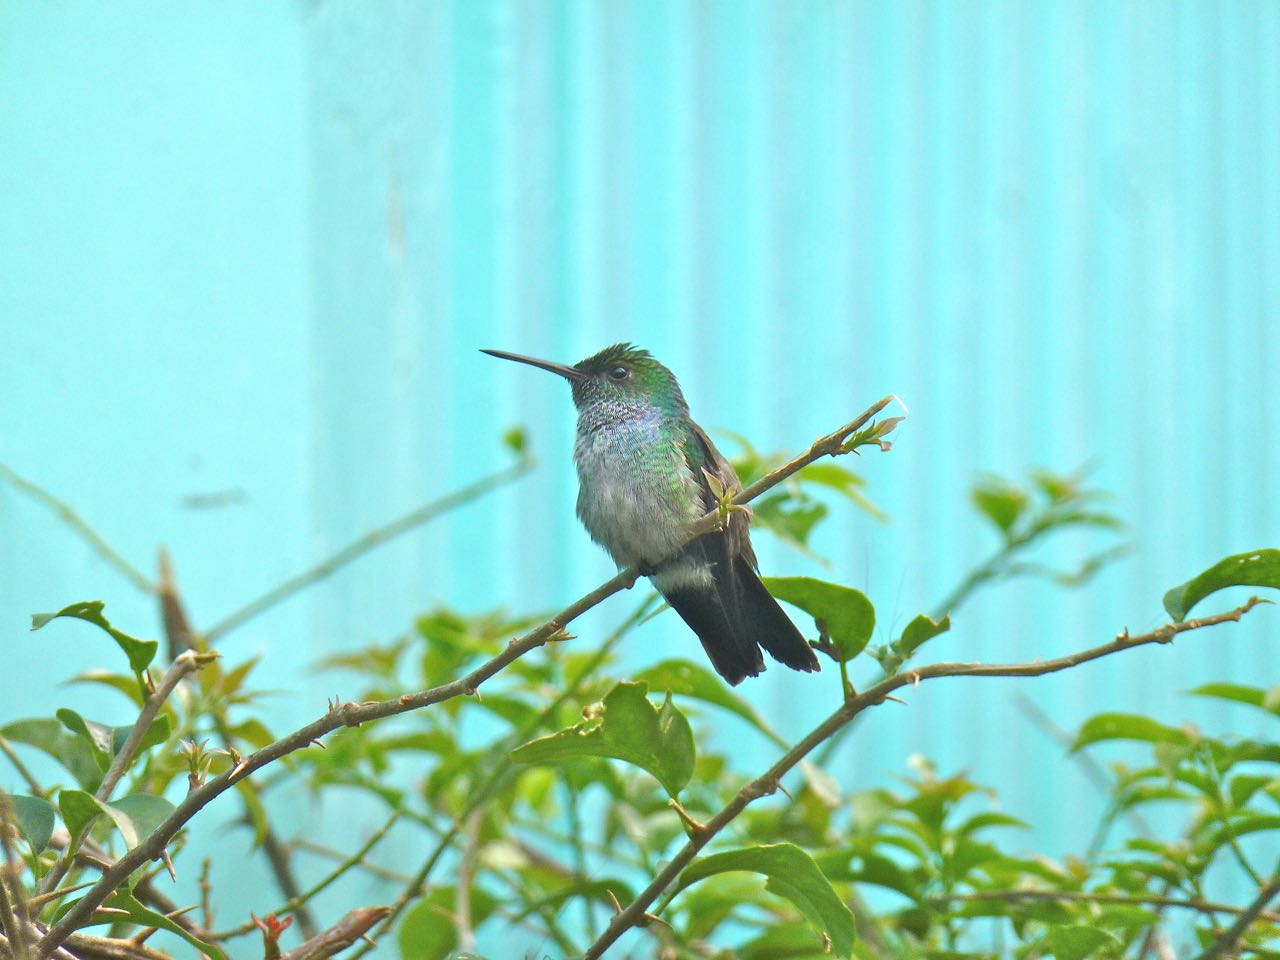 Blue-chested Hummingbirds